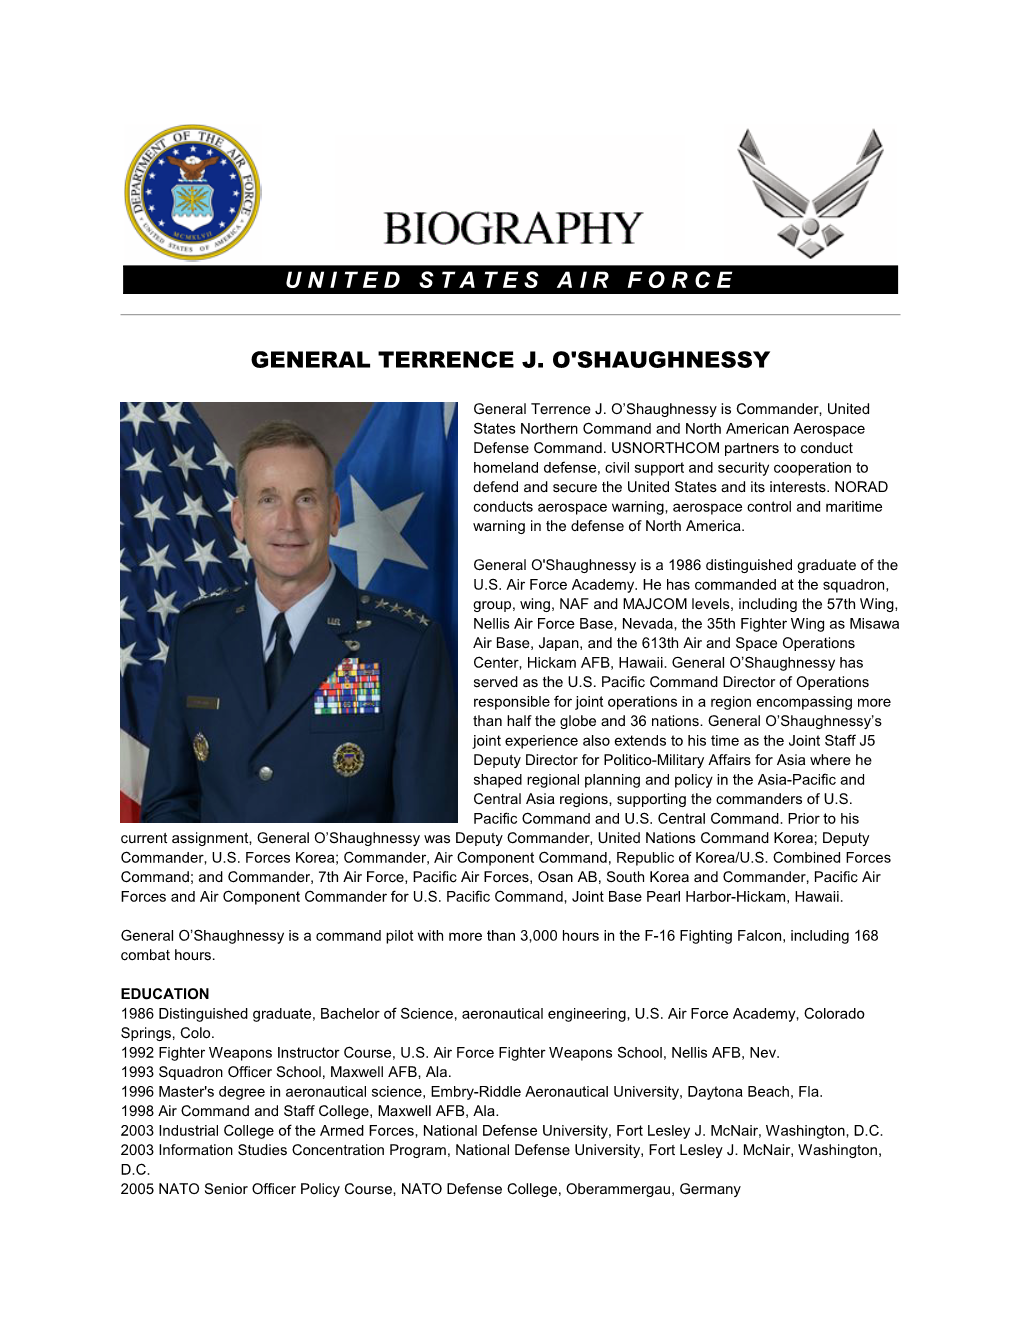 United States Air Force General Terrence J. O